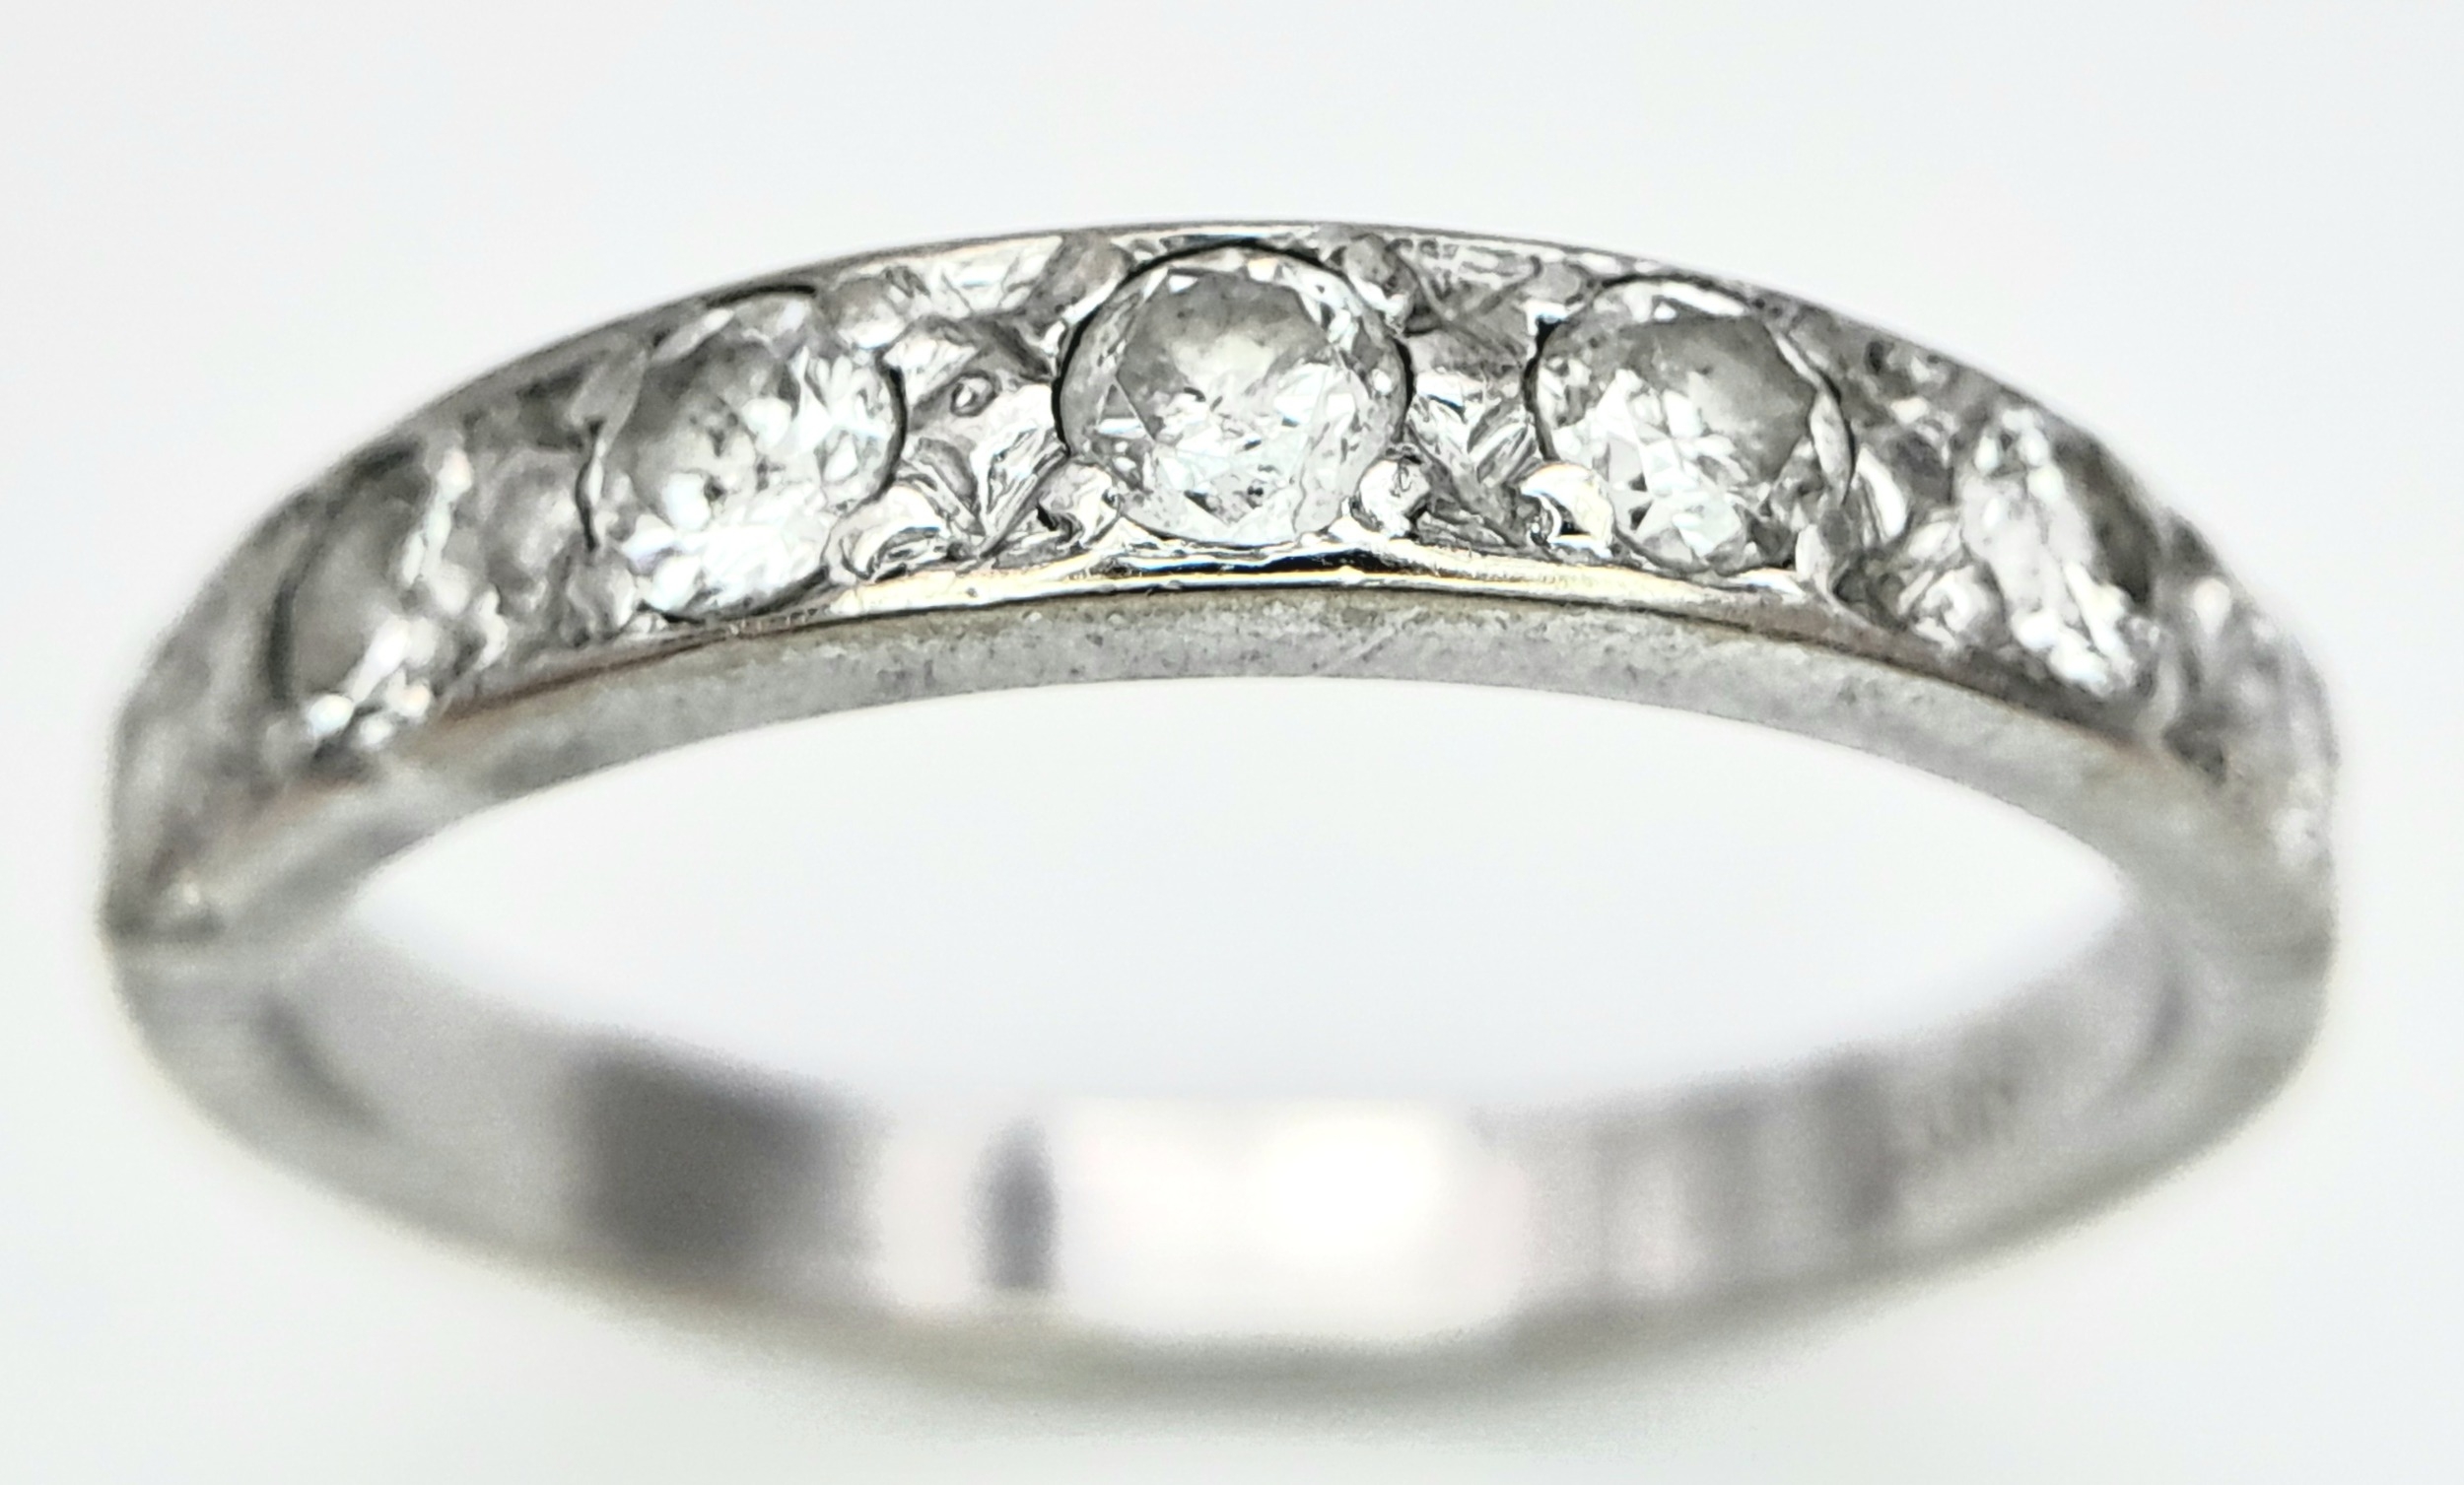 AN 18K WHITE GOLD DIAMOND BAND RING. 0.50CT. 3.2G. SIZE O. - Image 4 of 6